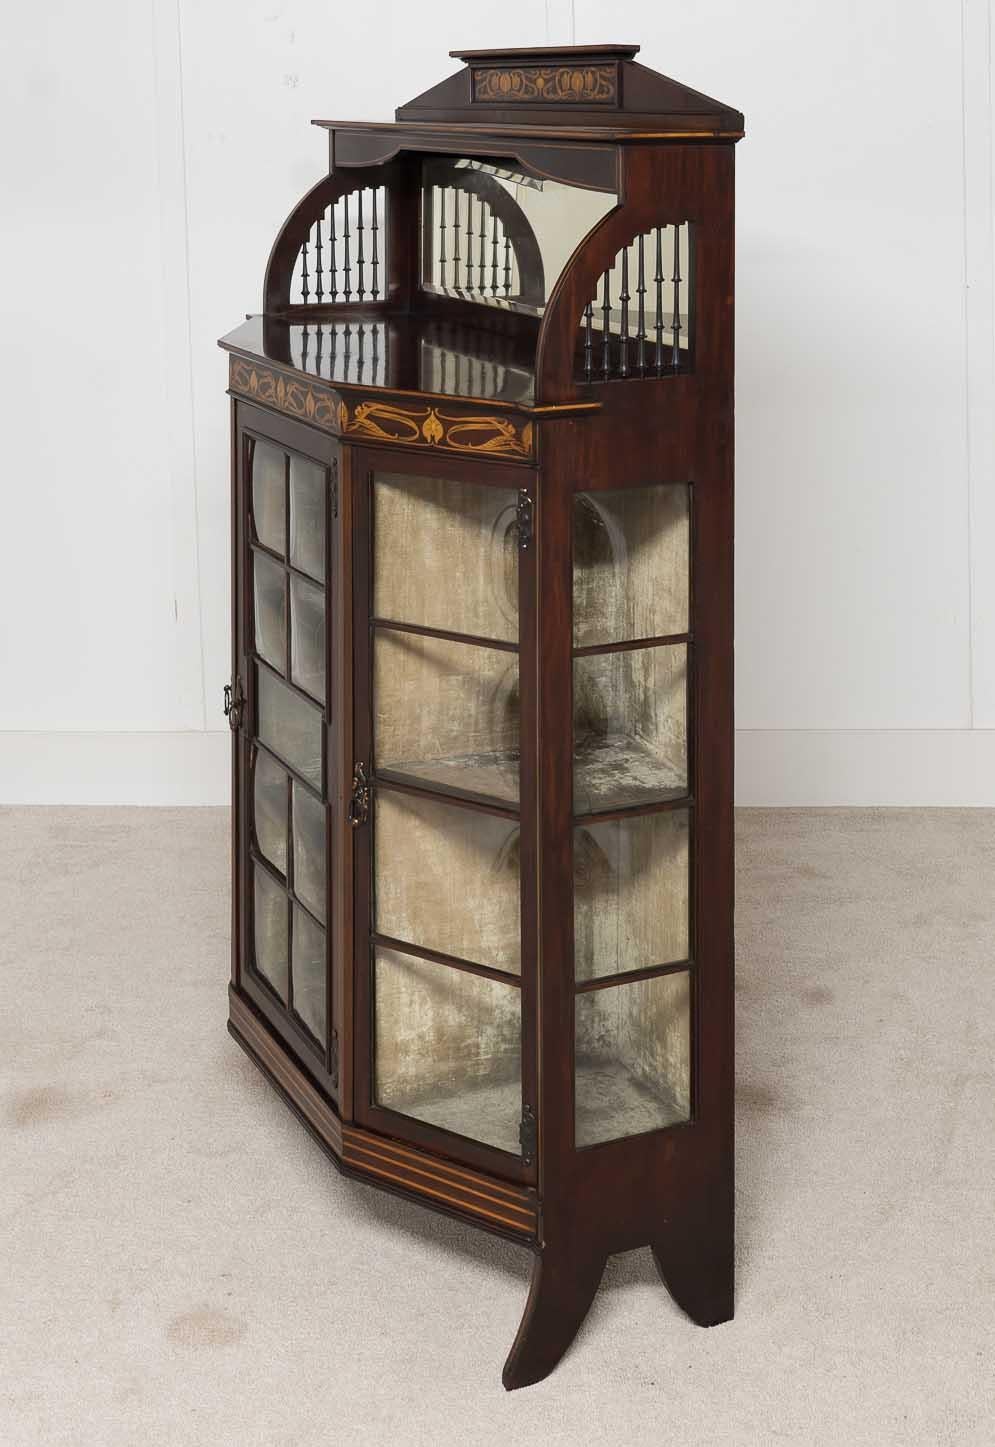 On trend period art nouveau display cabinet or Bijouterie
Circa 1900 on this wonderful piece which is crafted from mahogany Original makers Golding and Son of Bolton, England
Wonderful floral inlay work with art nouveau floral motifs
Mirrored top